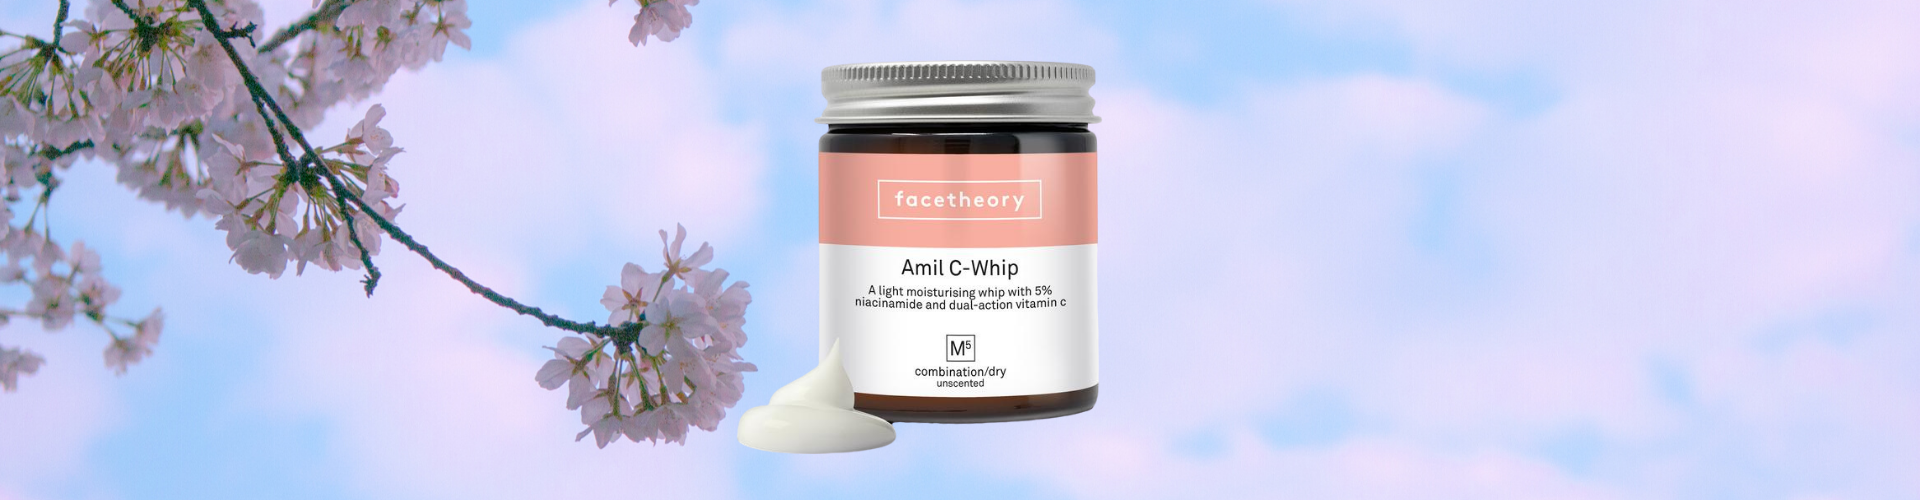 Facetheory amil-c whip review - photo of the moisturiser with a cherry blossom background.